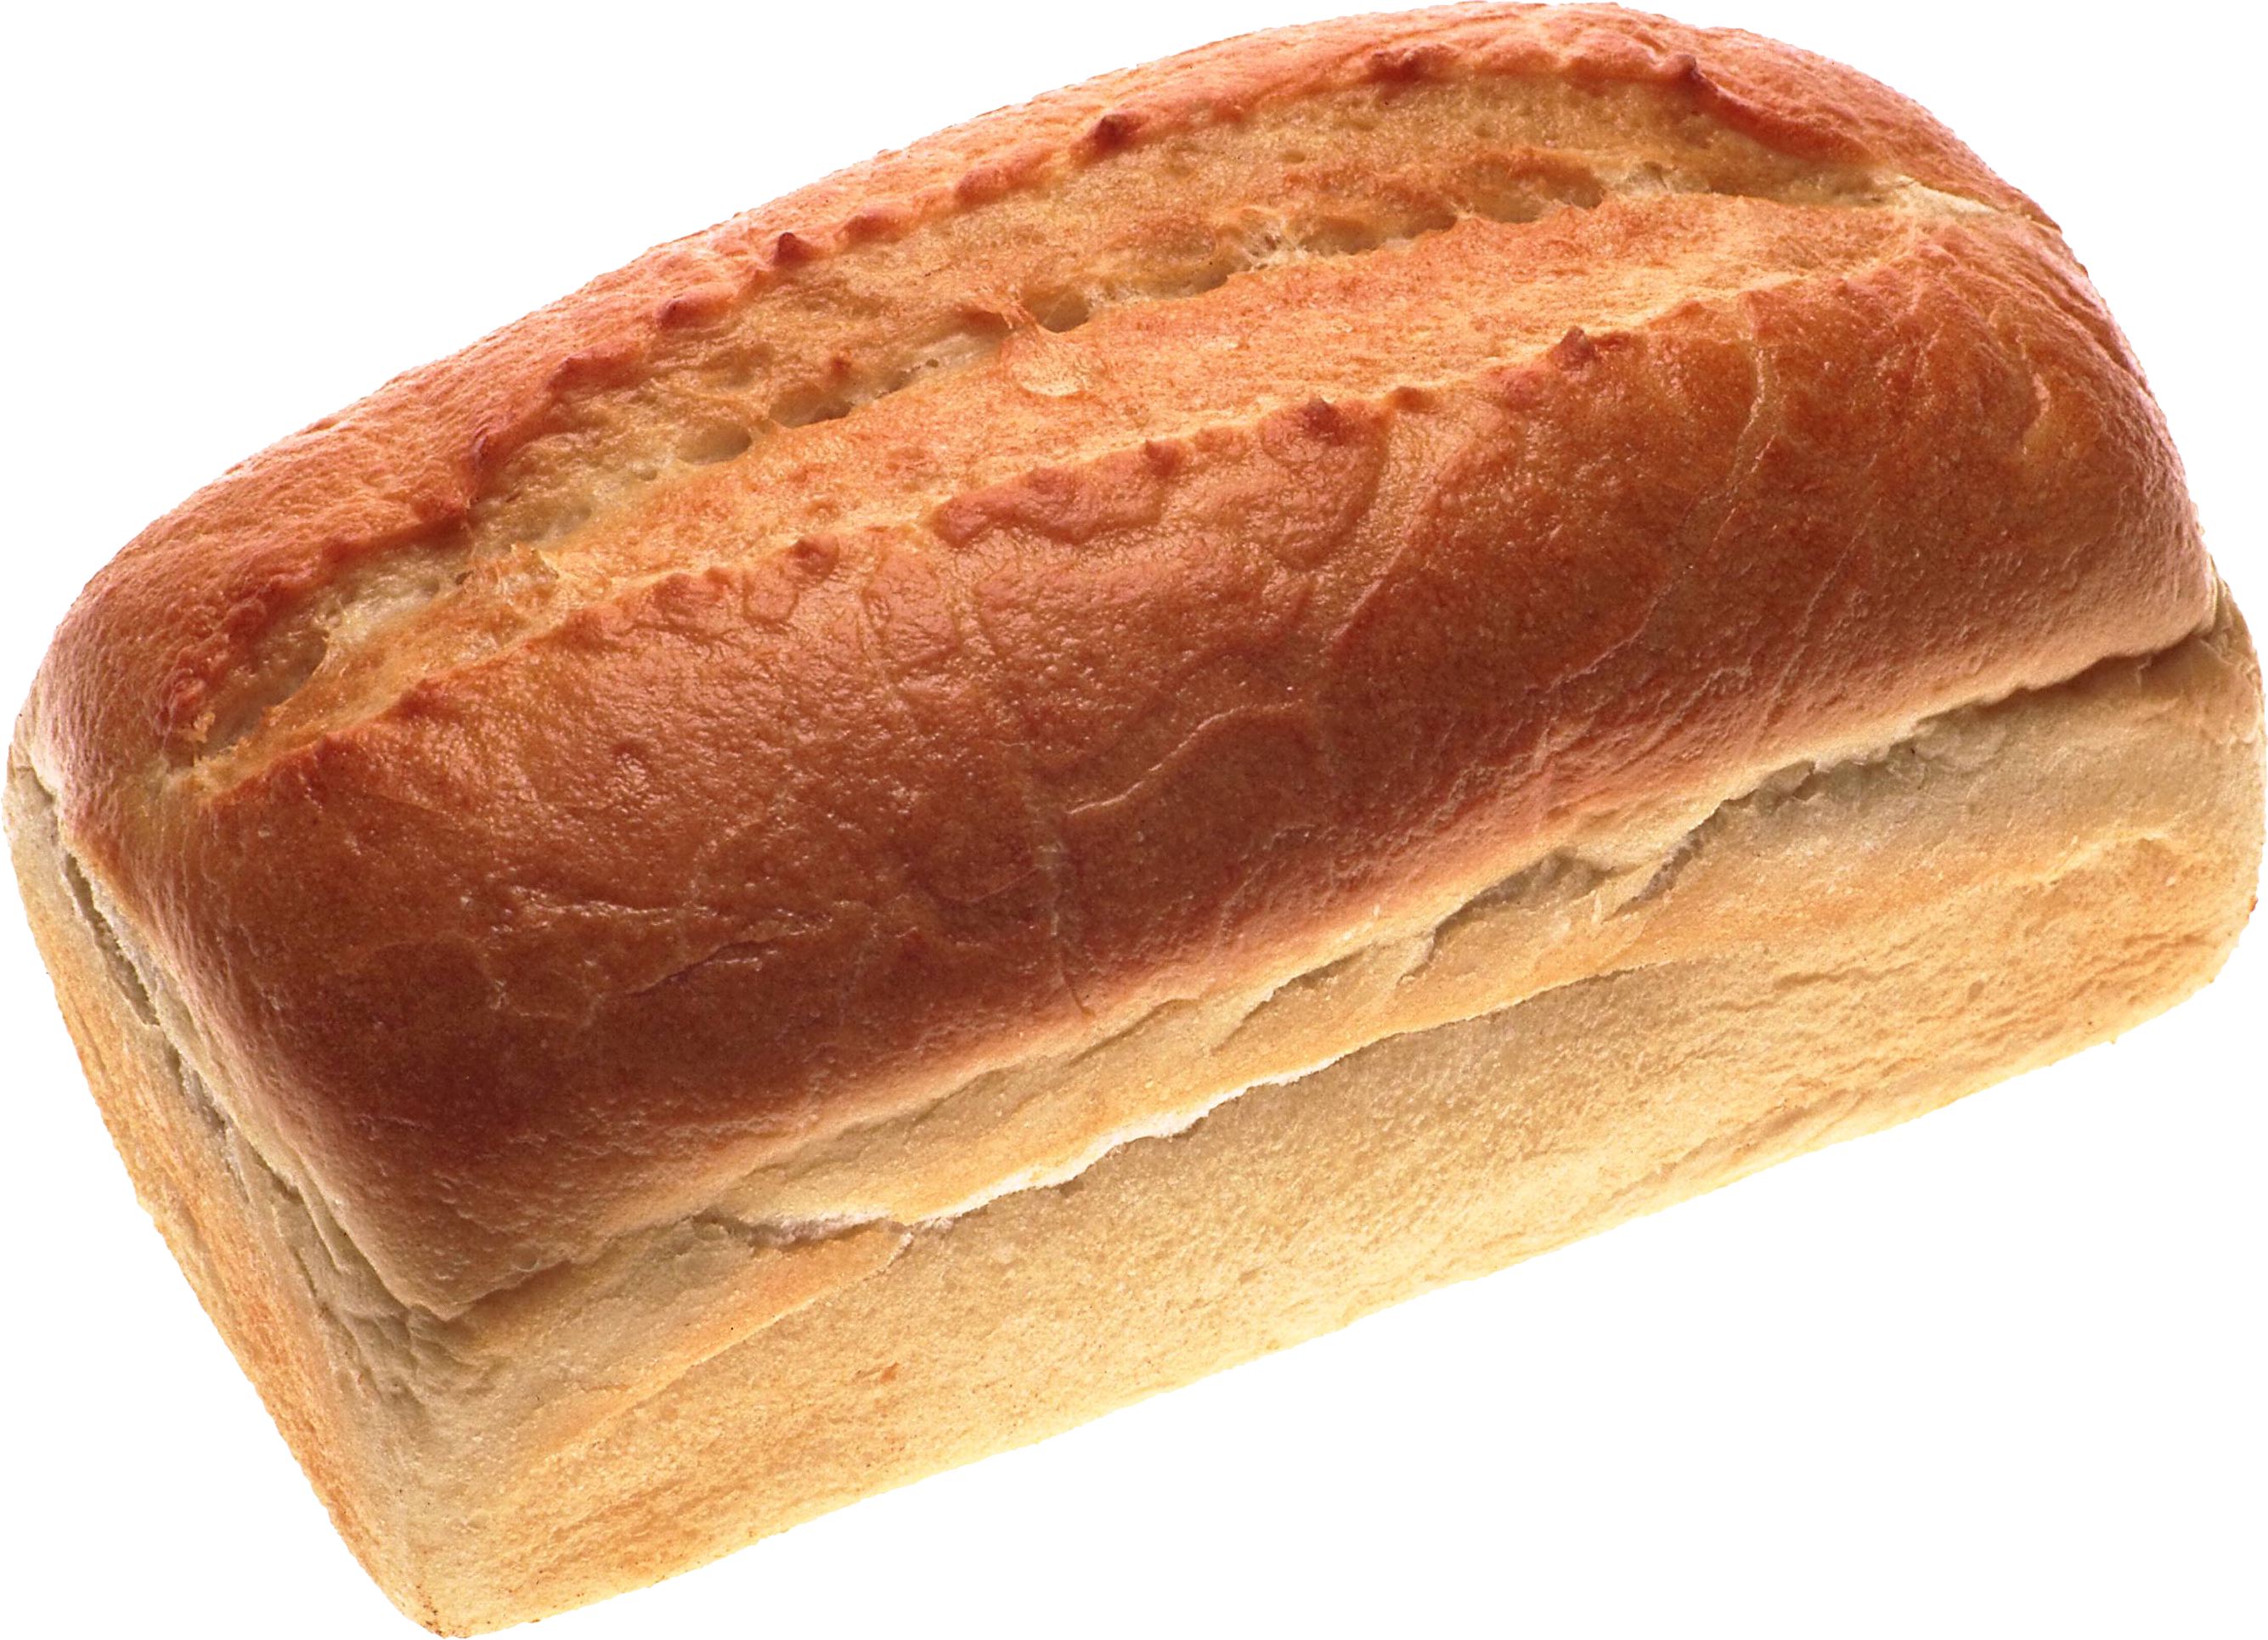 Bread PNG image - Bread PNG - Bread HD PNG, Bread PNG HD Images - Free PNG